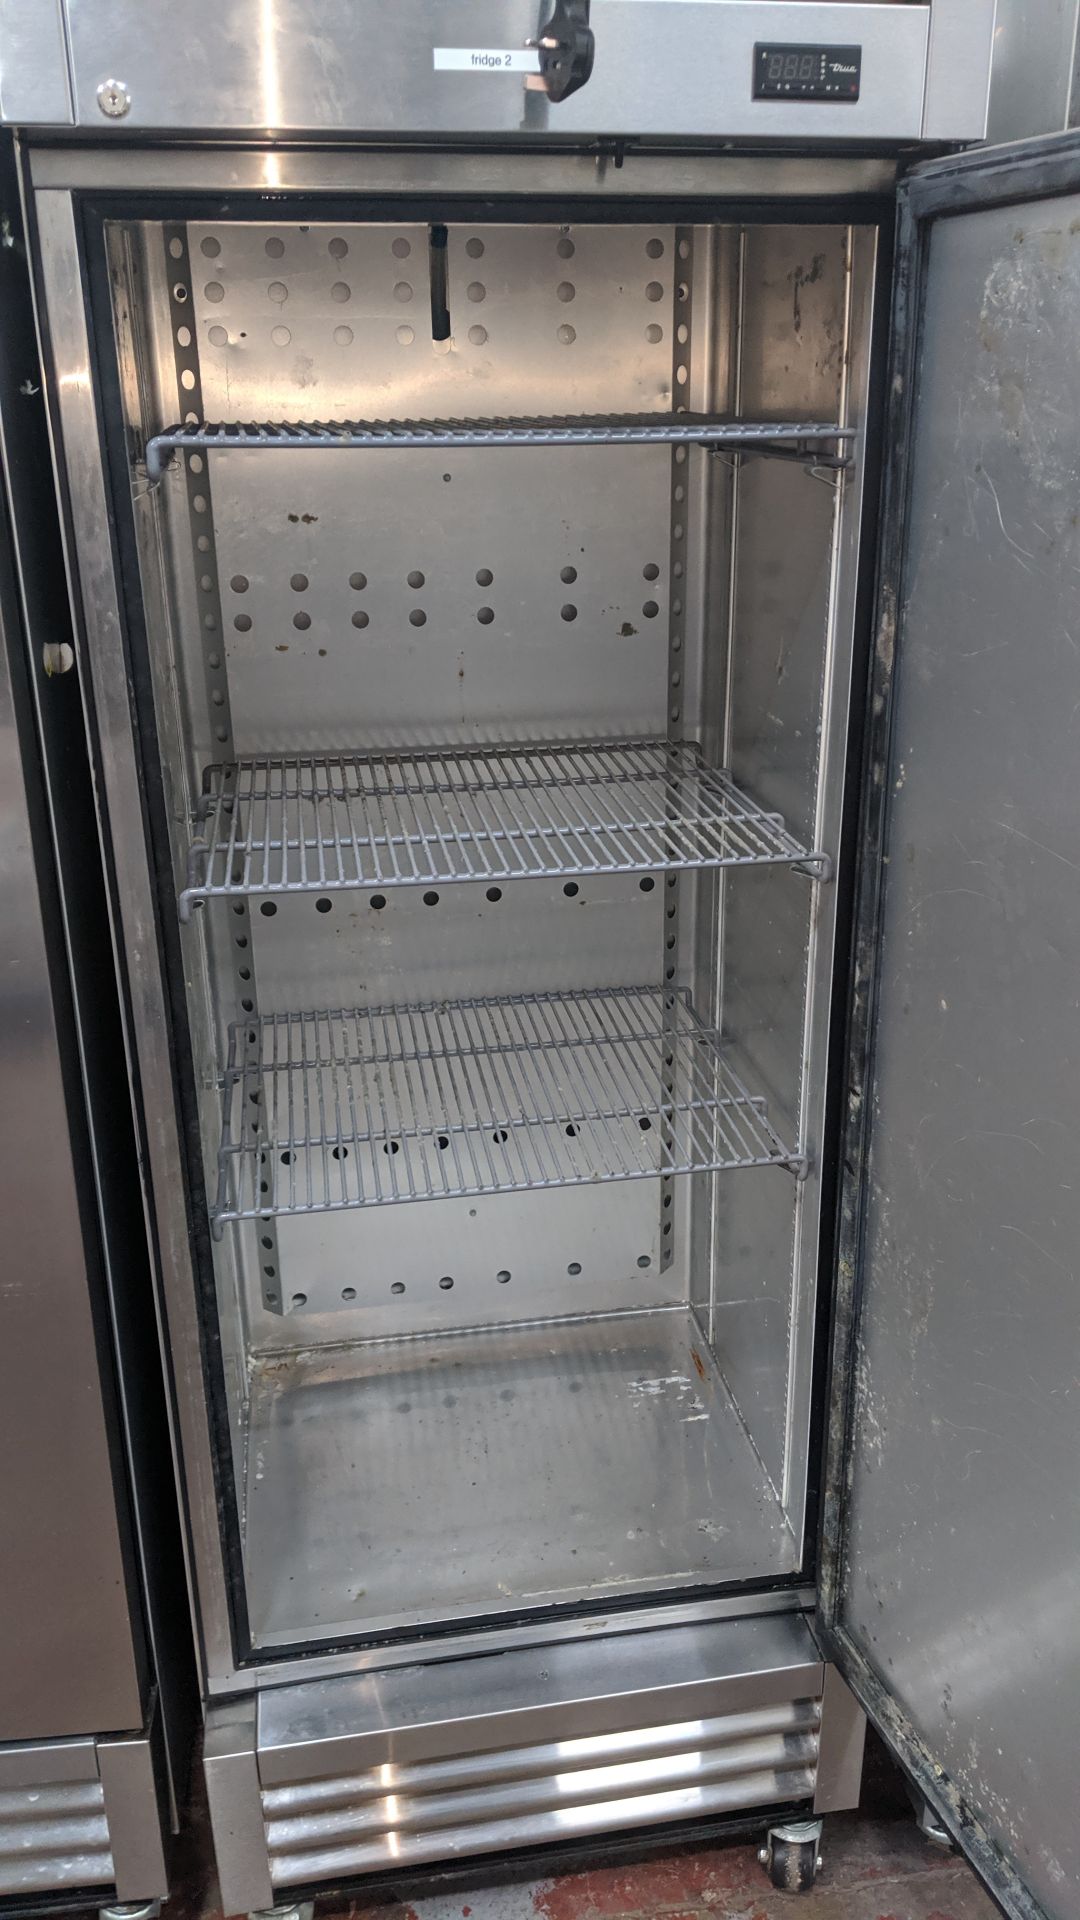 2018 True Refrigeration model T19E stainless steel mobile upright fridge. Cost price ï¿½1,150 plus - Image 3 of 4